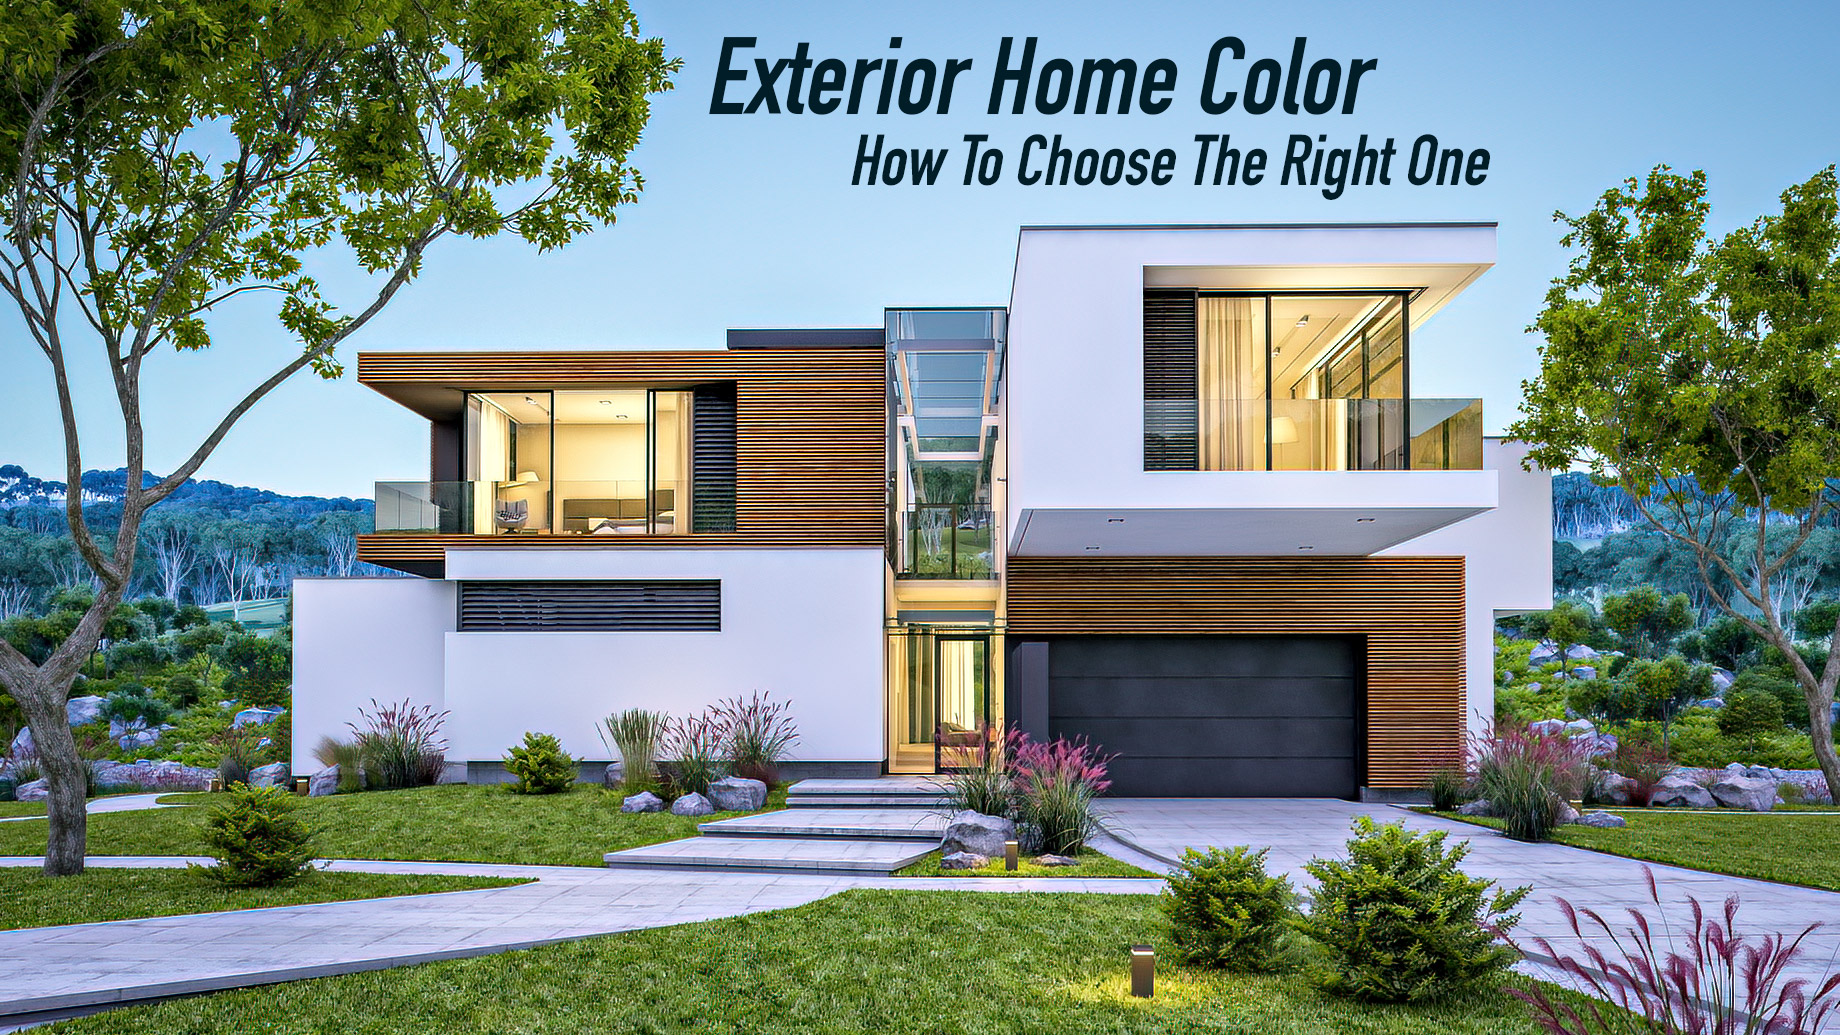 Exterior Home Color - How To Choose The Right One